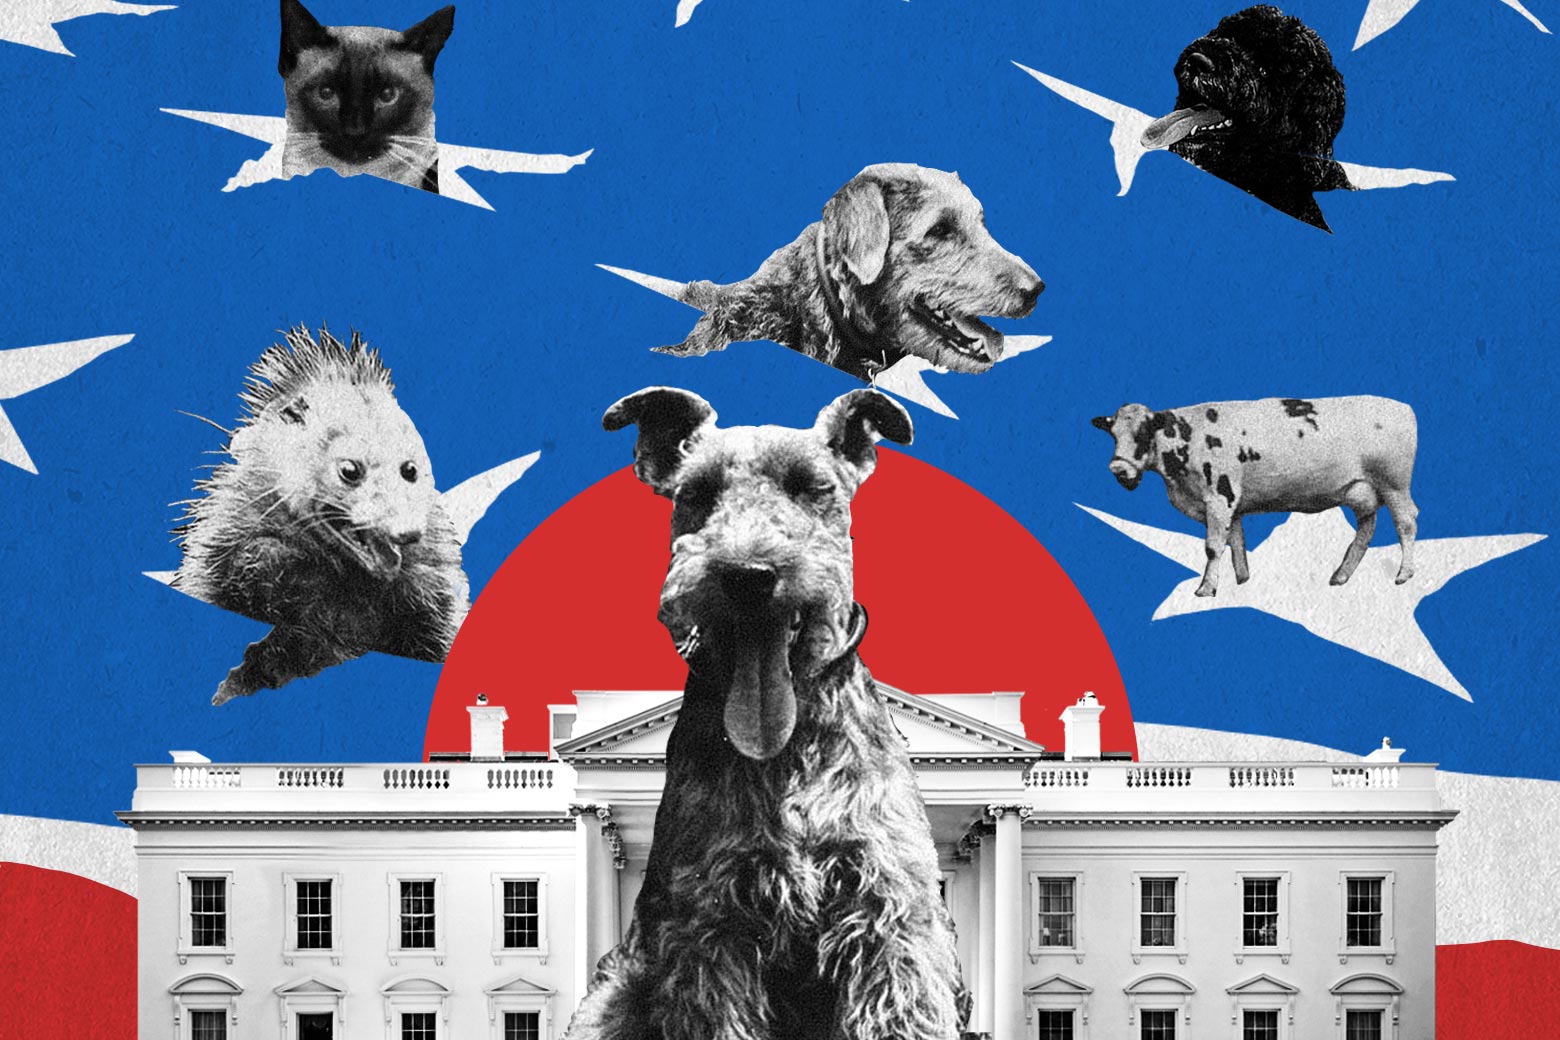 Some dogs, a cat, a possum, and a cow superimposed over a photo of the White House.